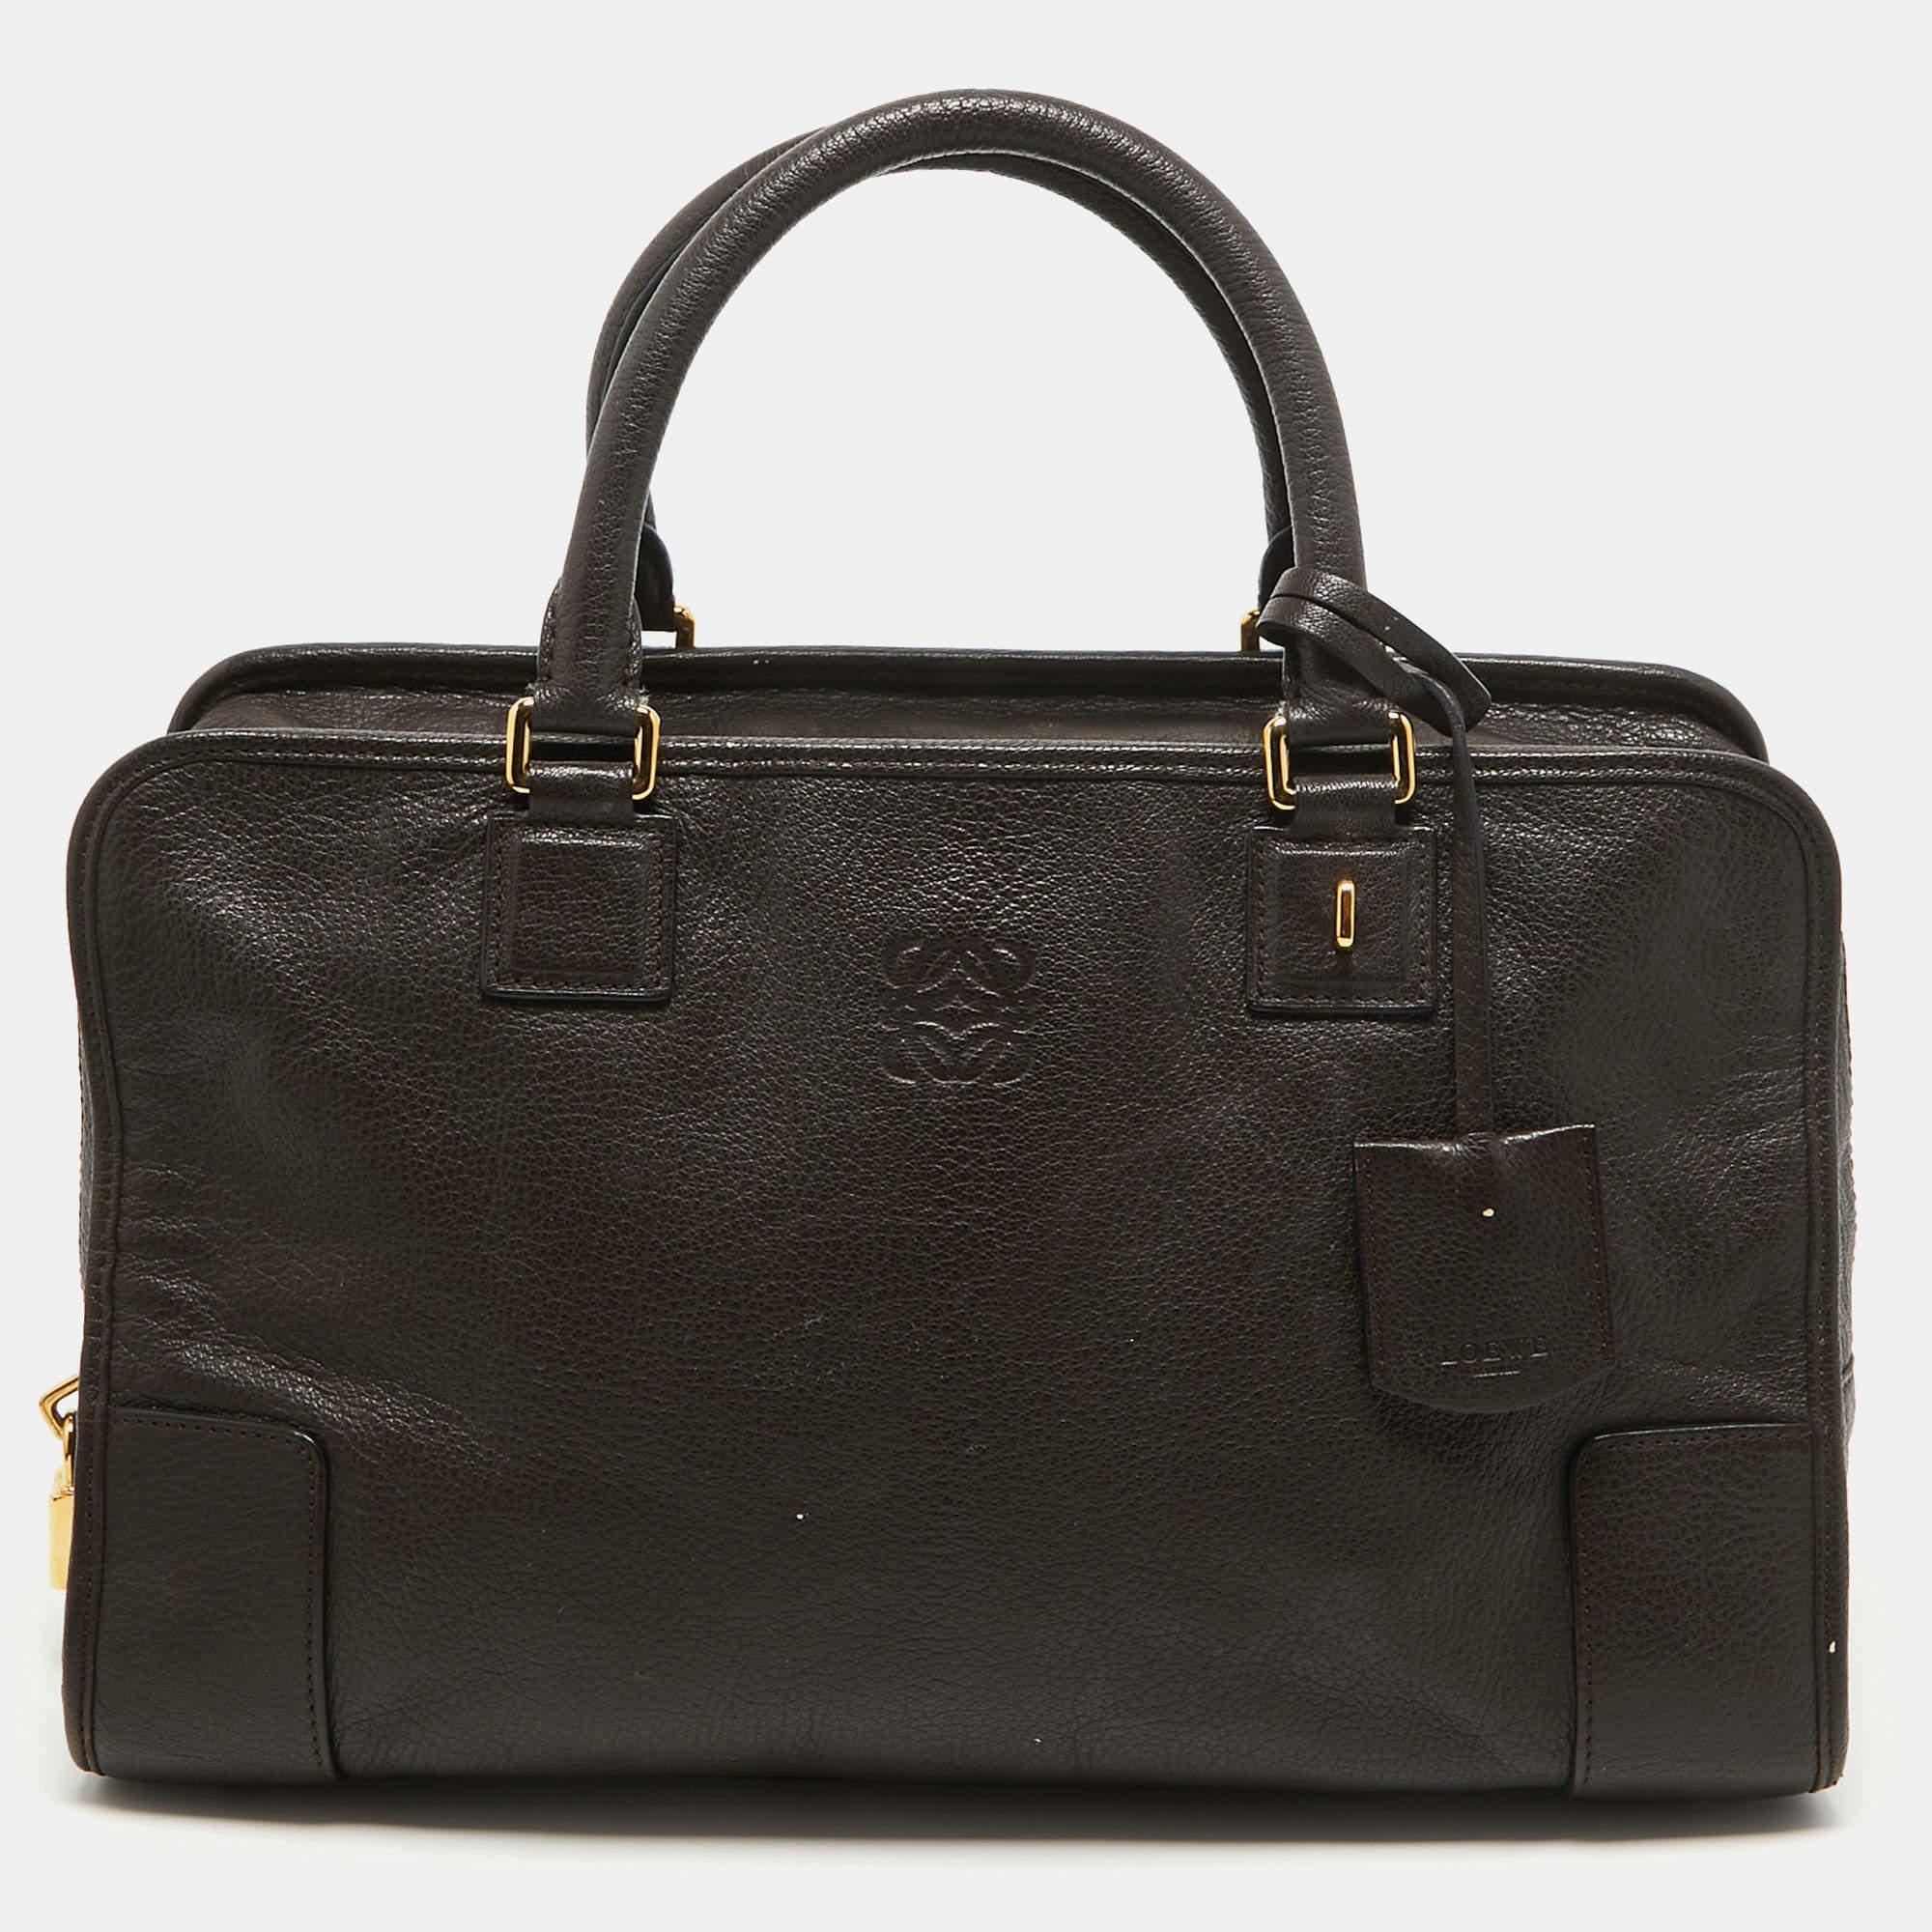 This Loewe Amazona 36 bag is a result of blending high crafting skills with a practical design. It arrives with a durable exterior completed by luxe detailing. It is an accessory that you can count on.

